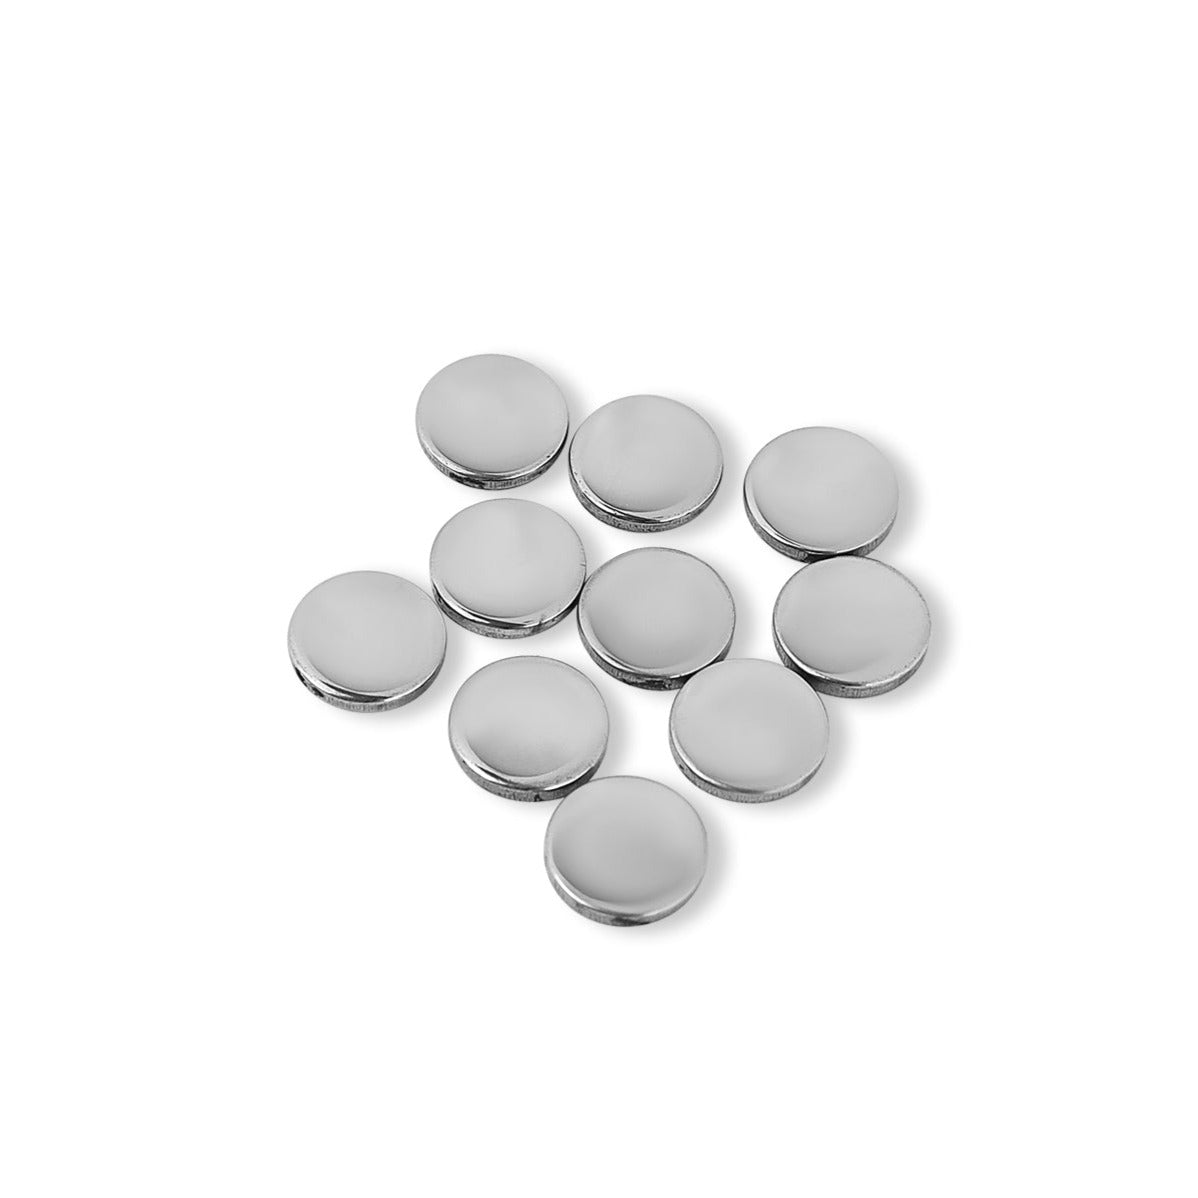 10 Pack - Polished Blank Stainless Steel Round Pendant / SBB0015